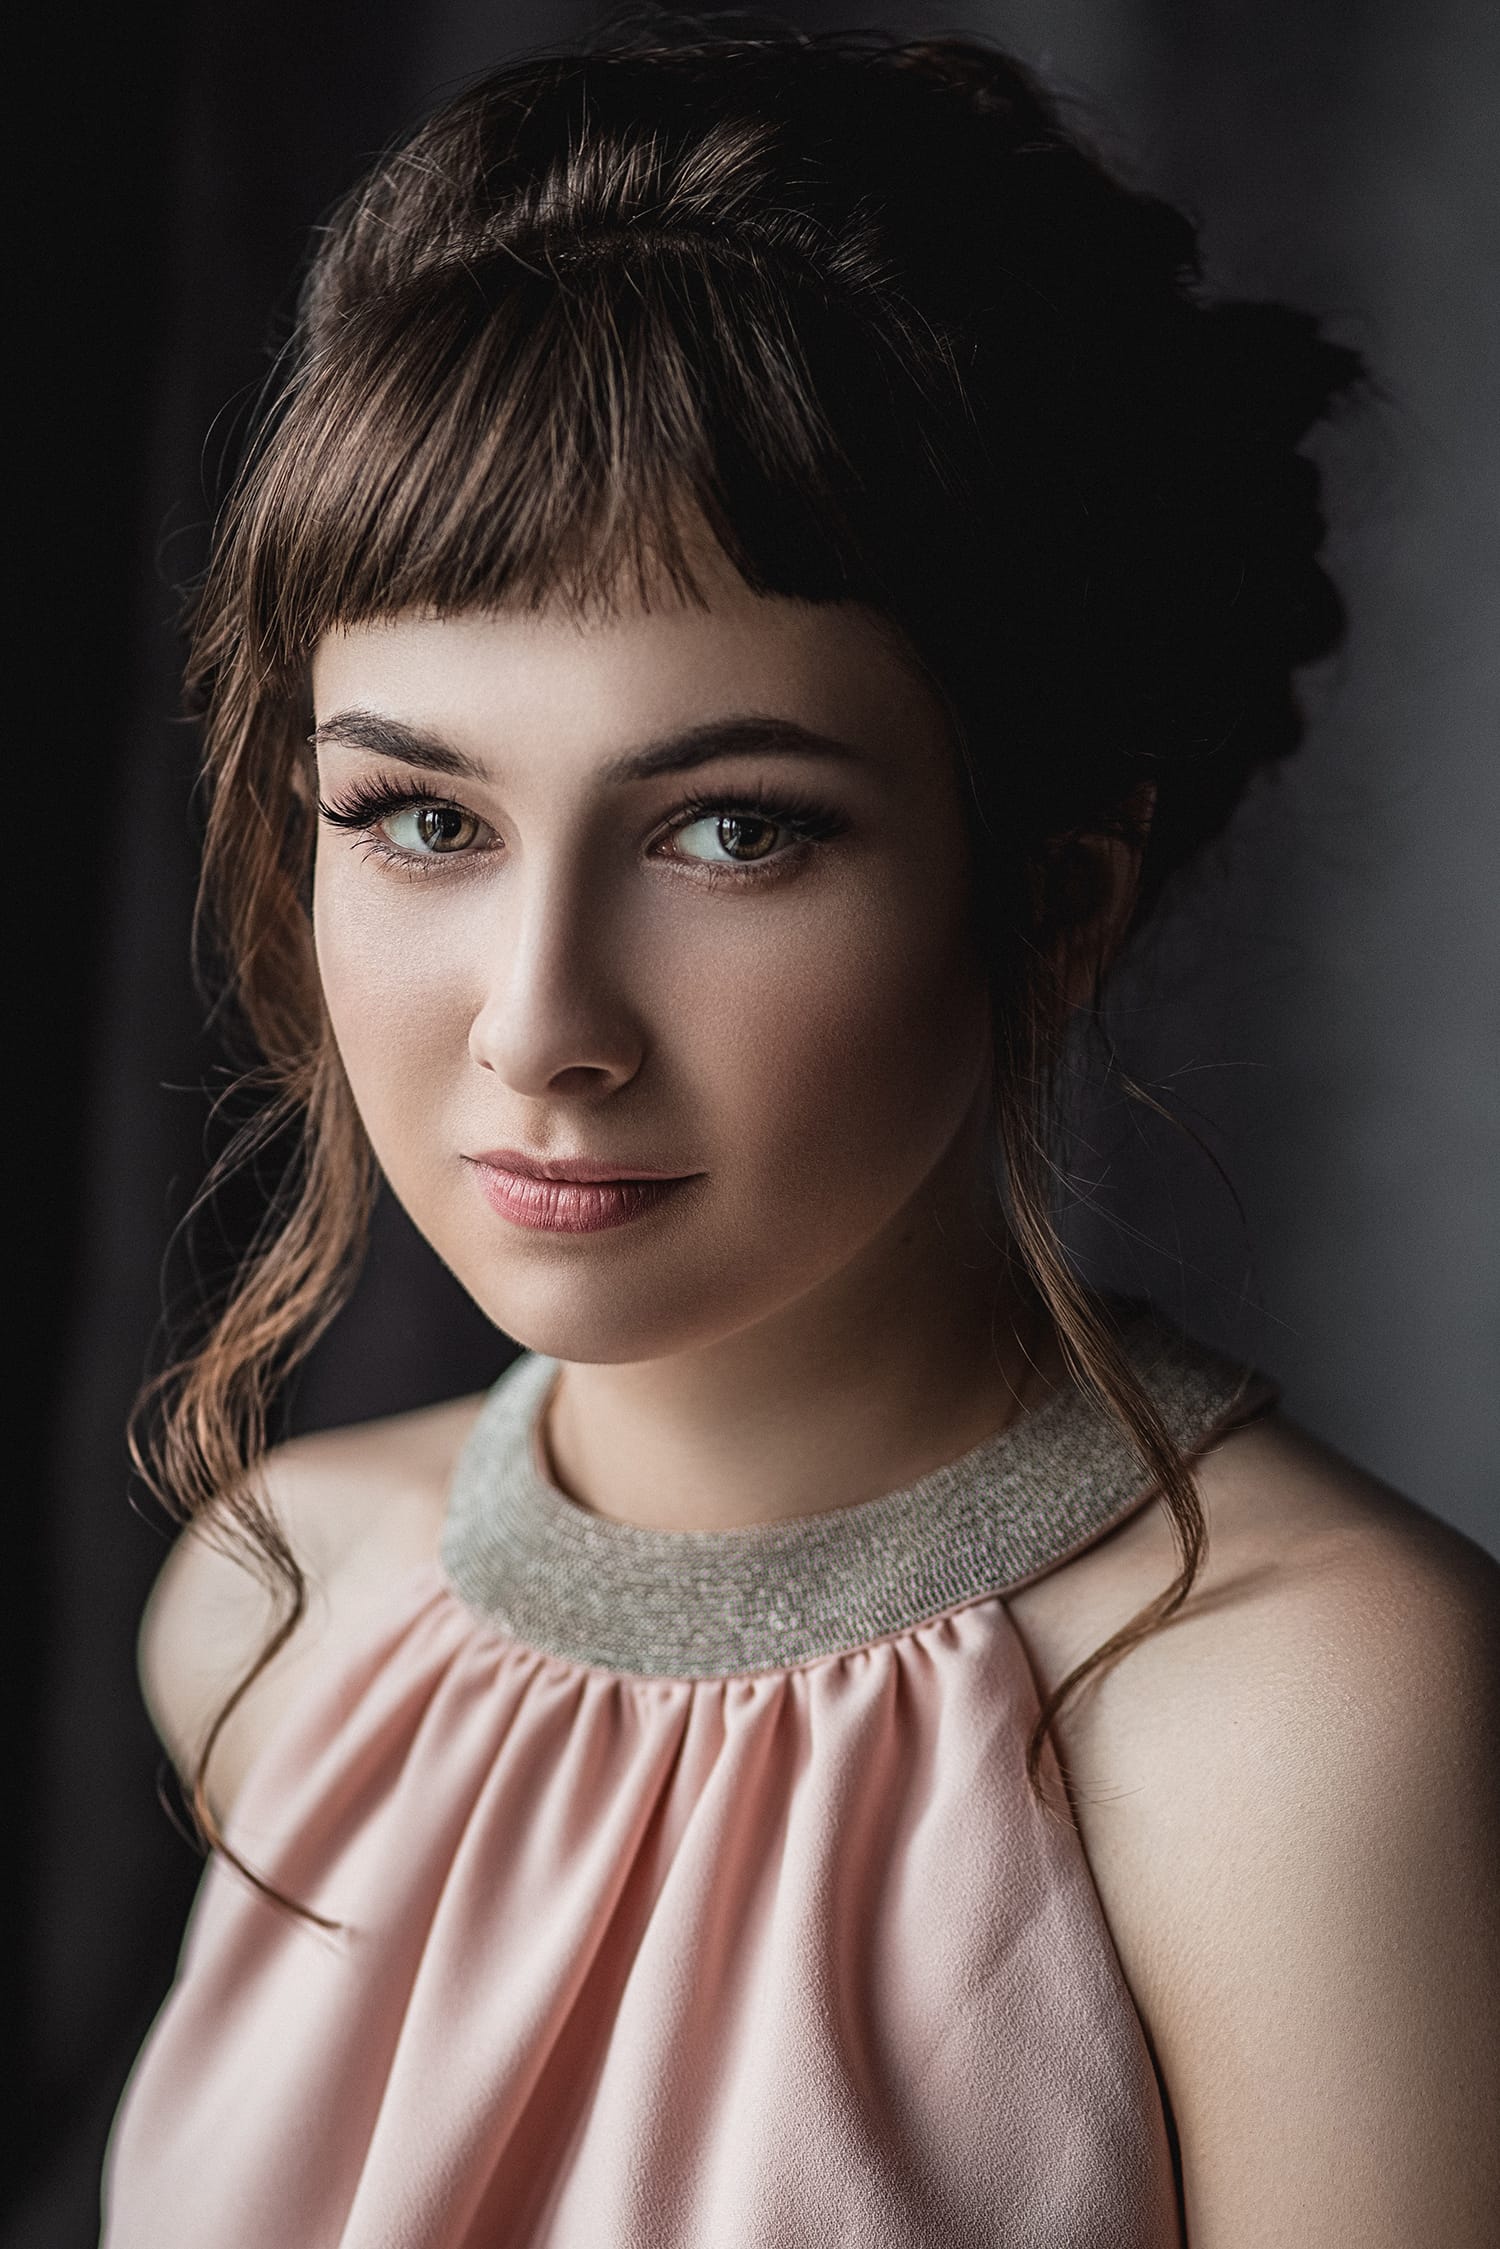 The Headshot Photography Guide: 18 Tips for Shooting Stunning Portraits